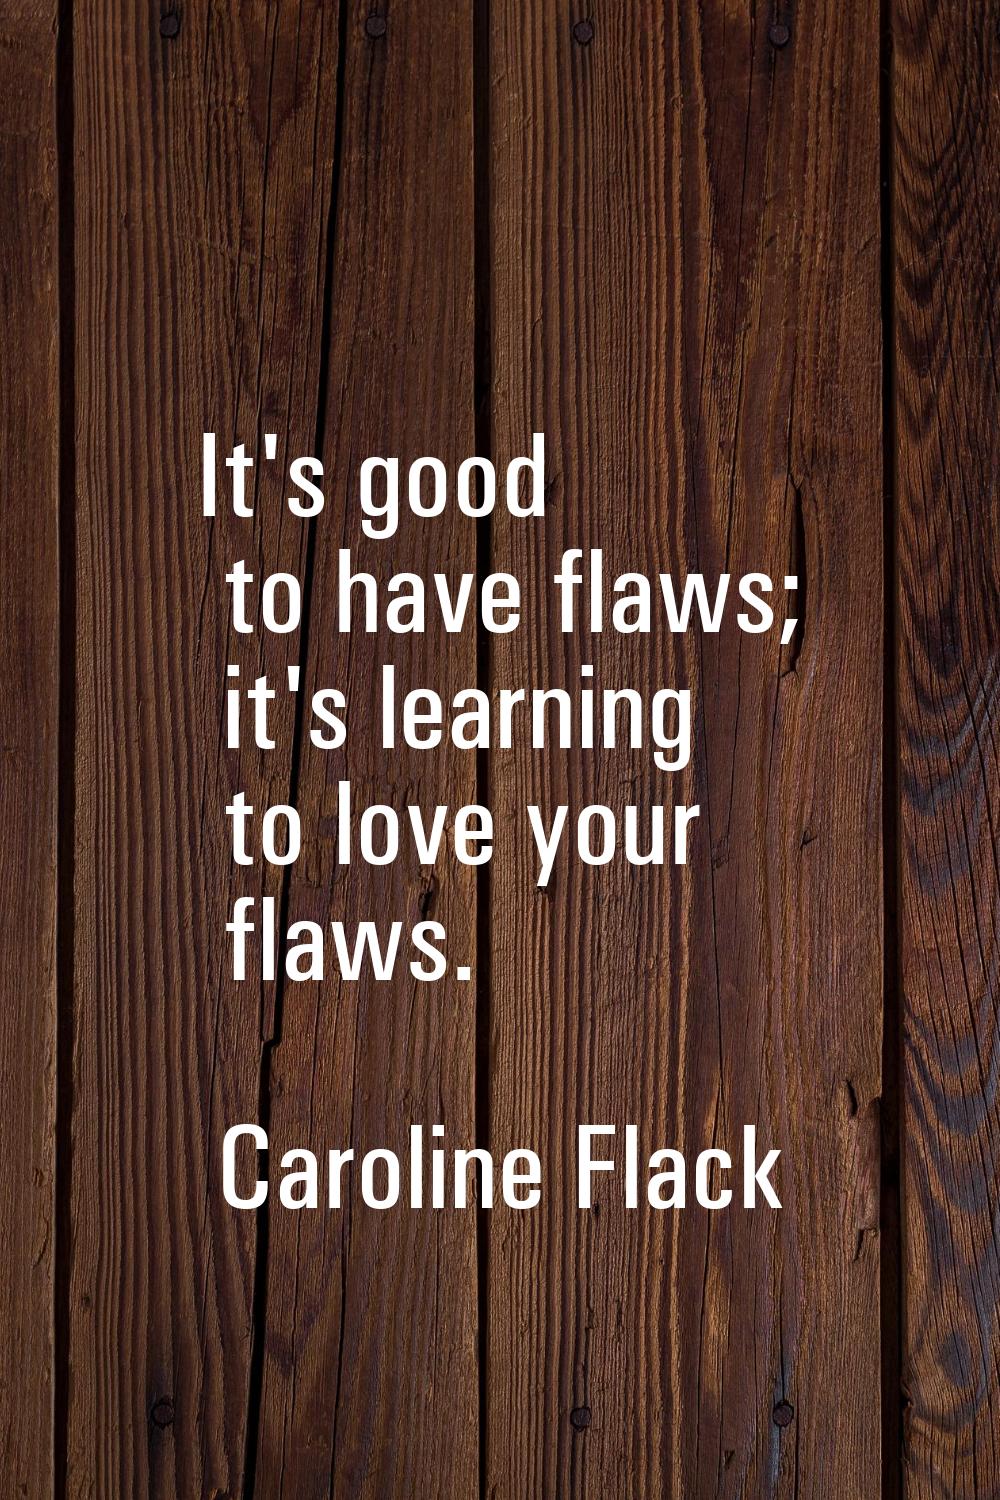 It's good to have flaws; it's learning to love your flaws.